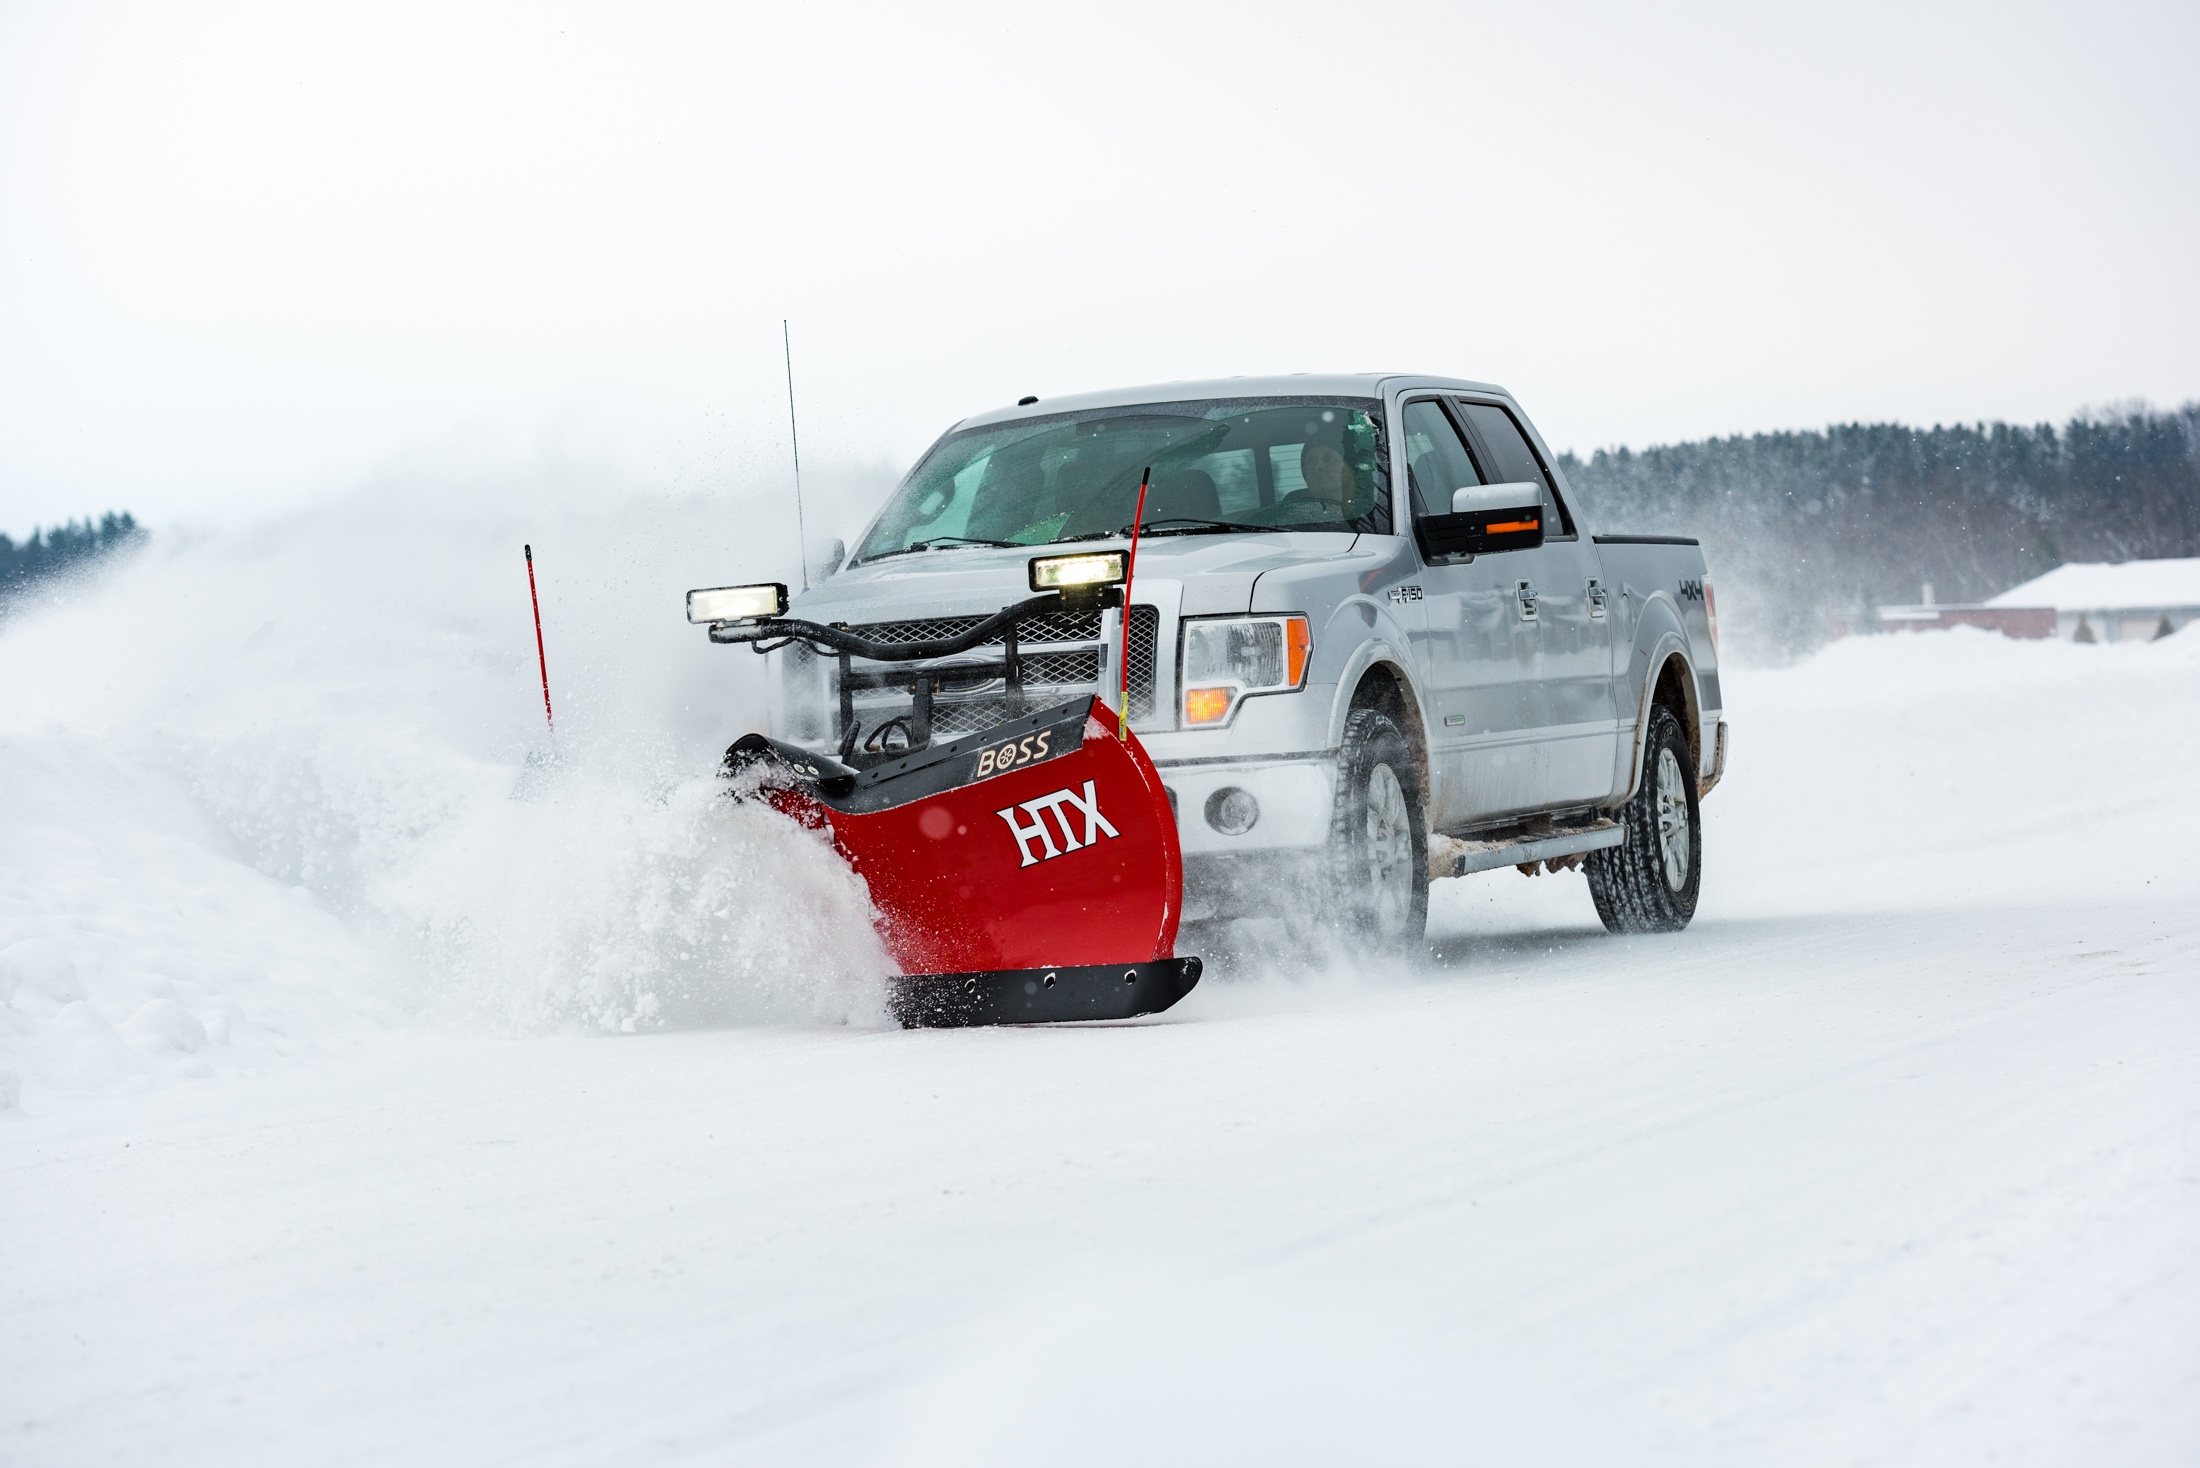 Strike Back with the HTX V-Plow